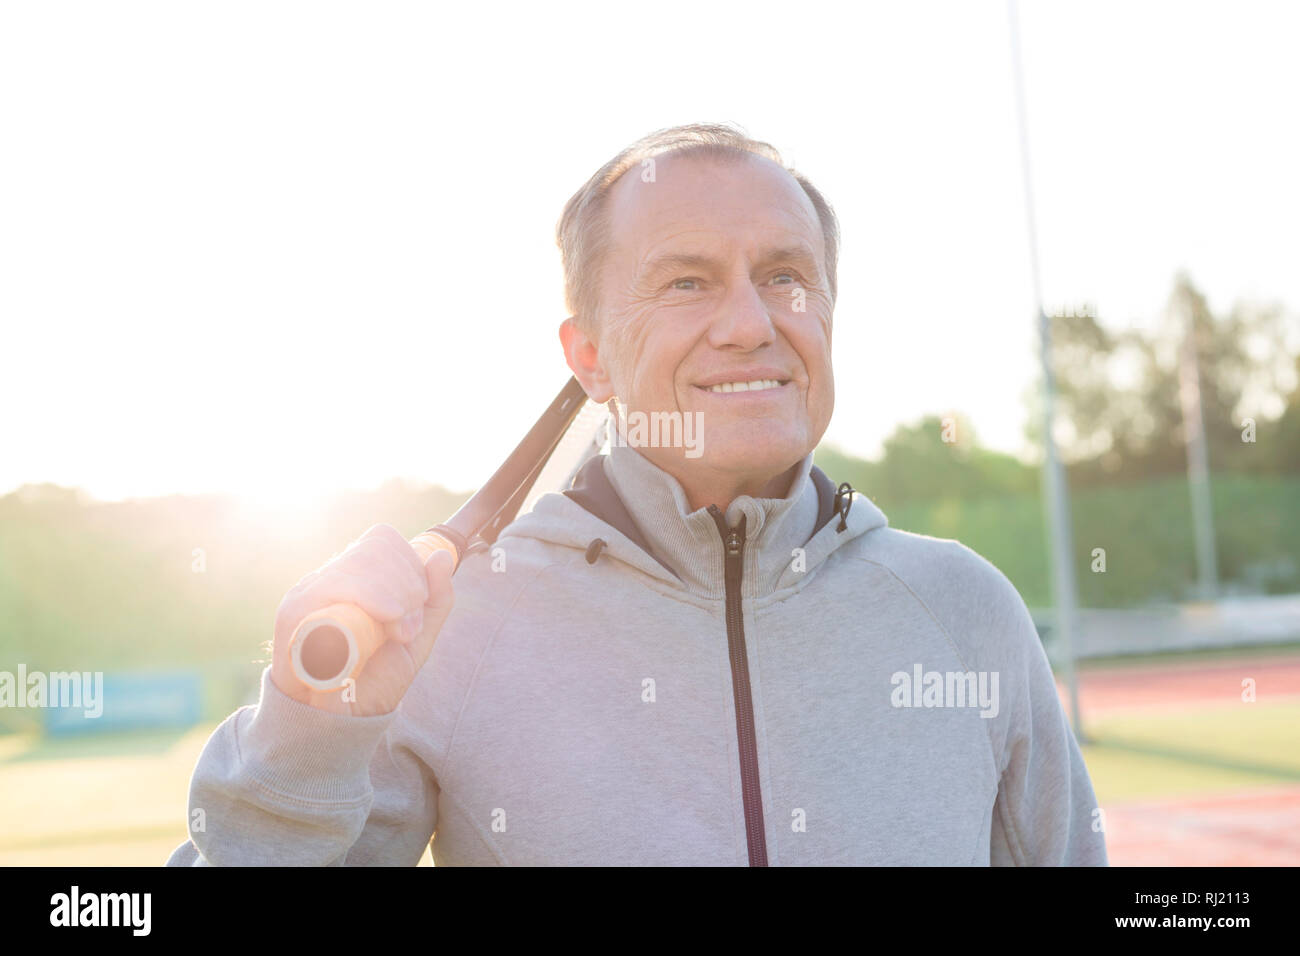 Smiling senior man standing with tennis racket on court against clear sky Stock Photo